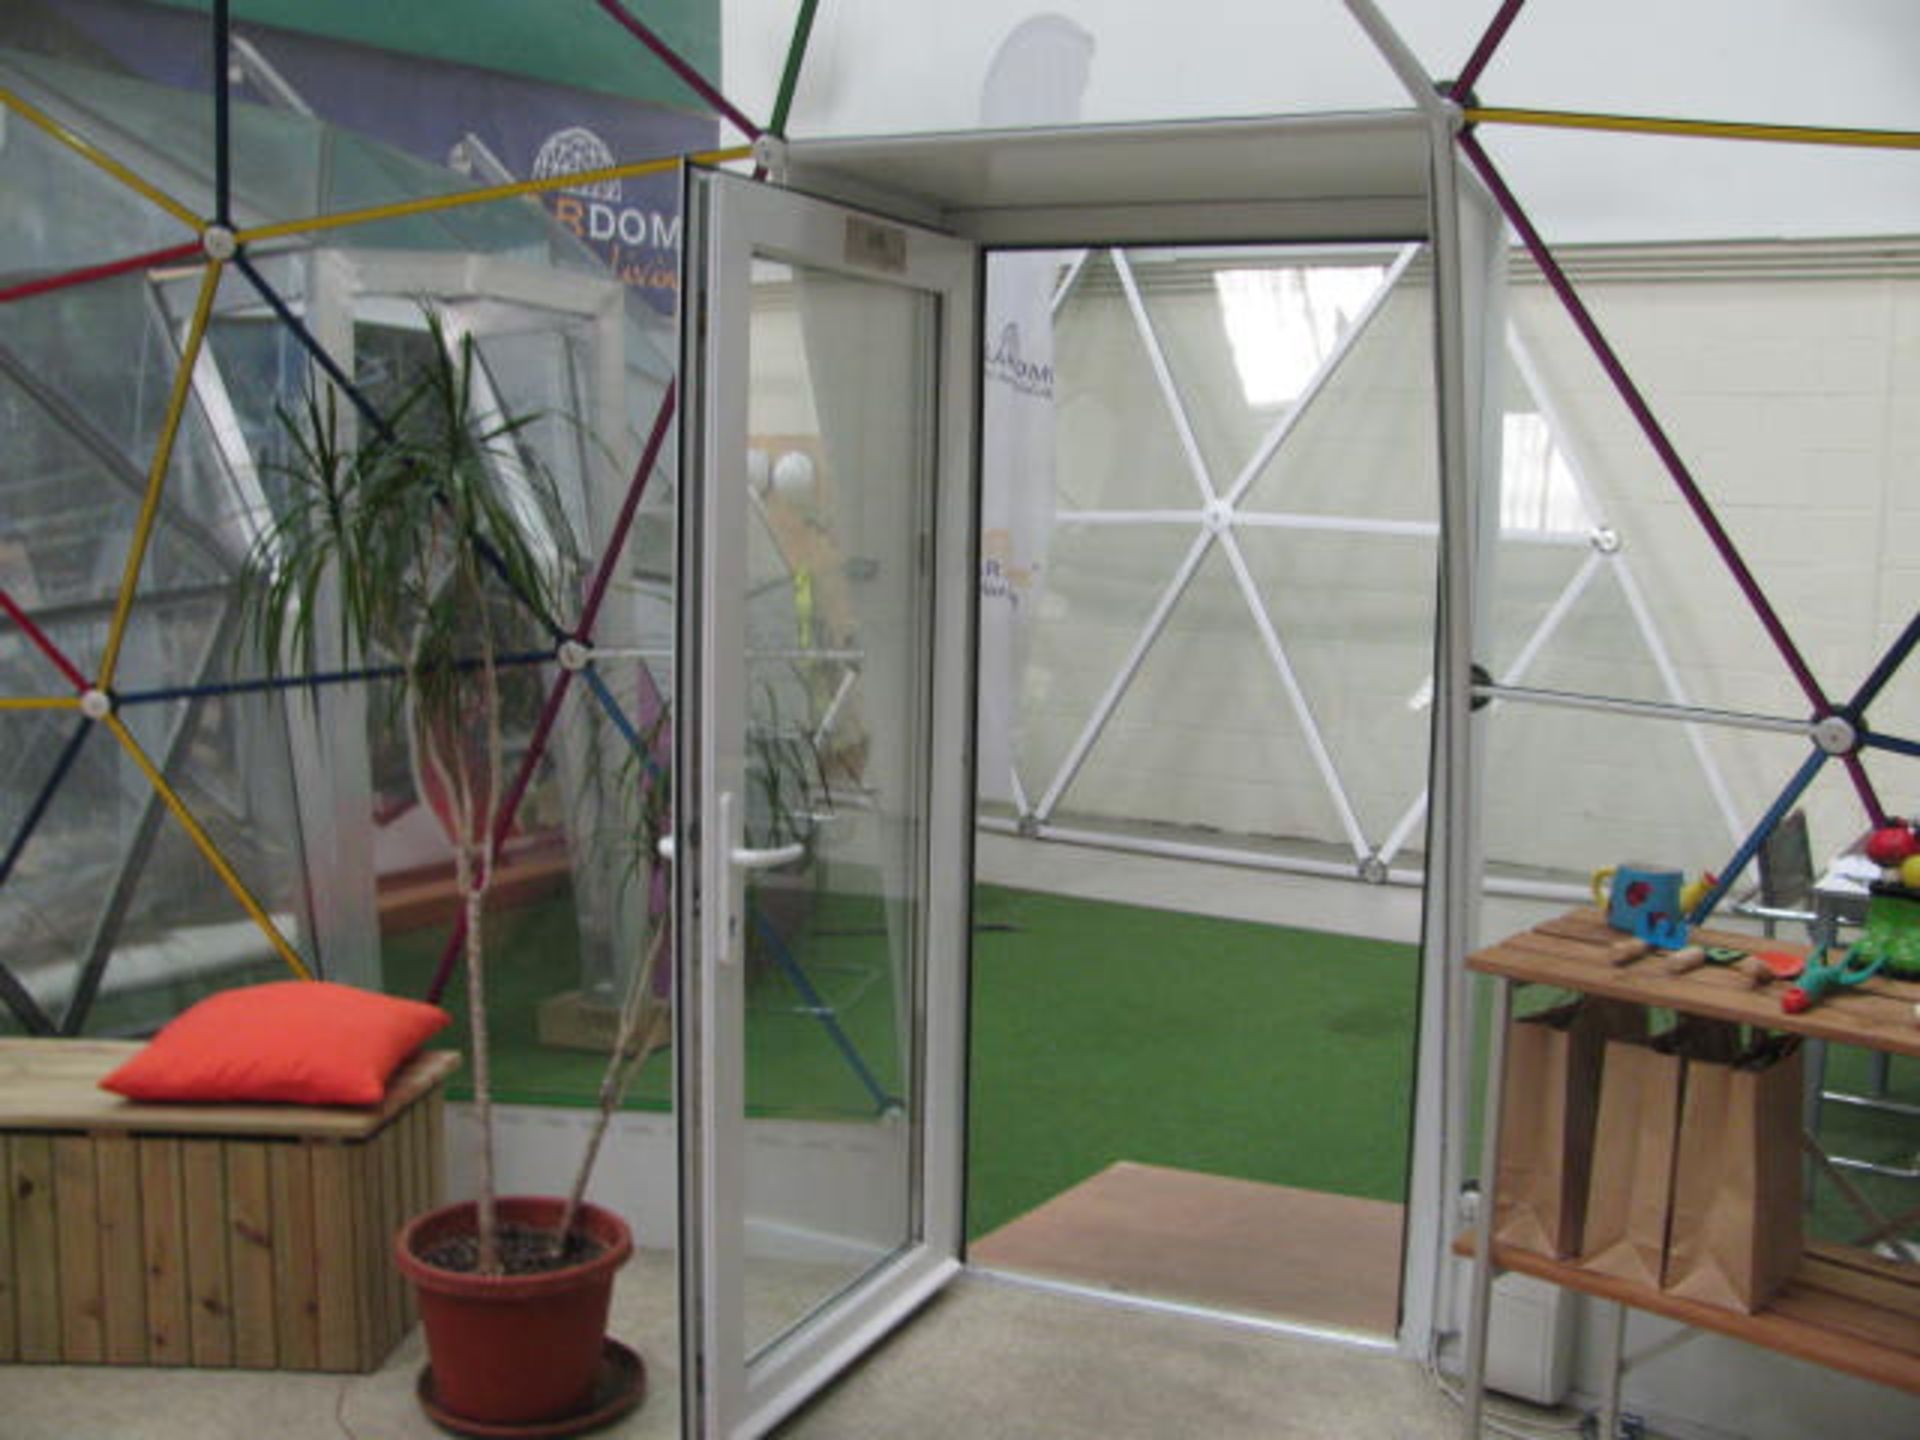 Geodesic dome garden room - Image 6 of 6